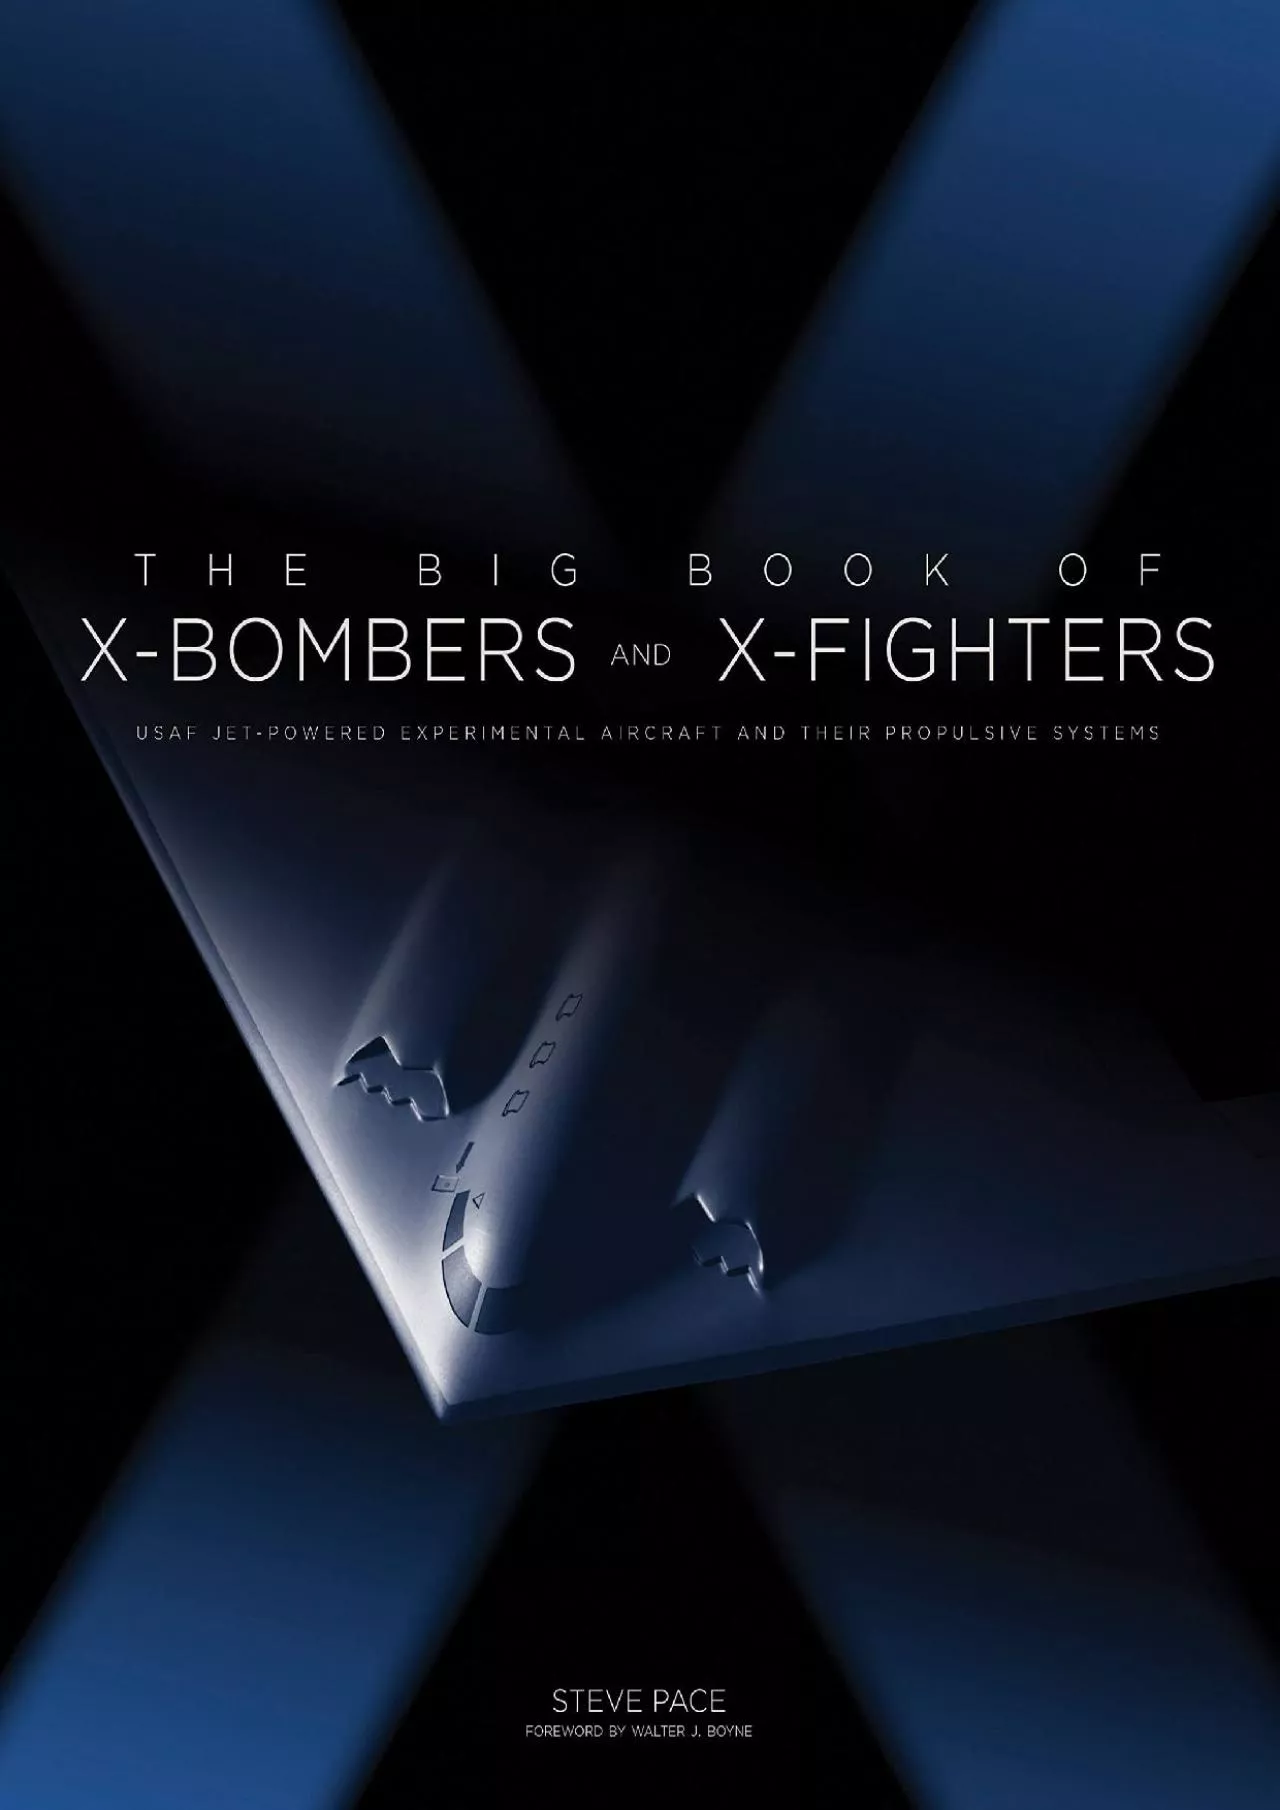 [BOOK]-The Big Book of X-Bombers & X-Fighters: USAF Jet-Powered Experimental Aircraft